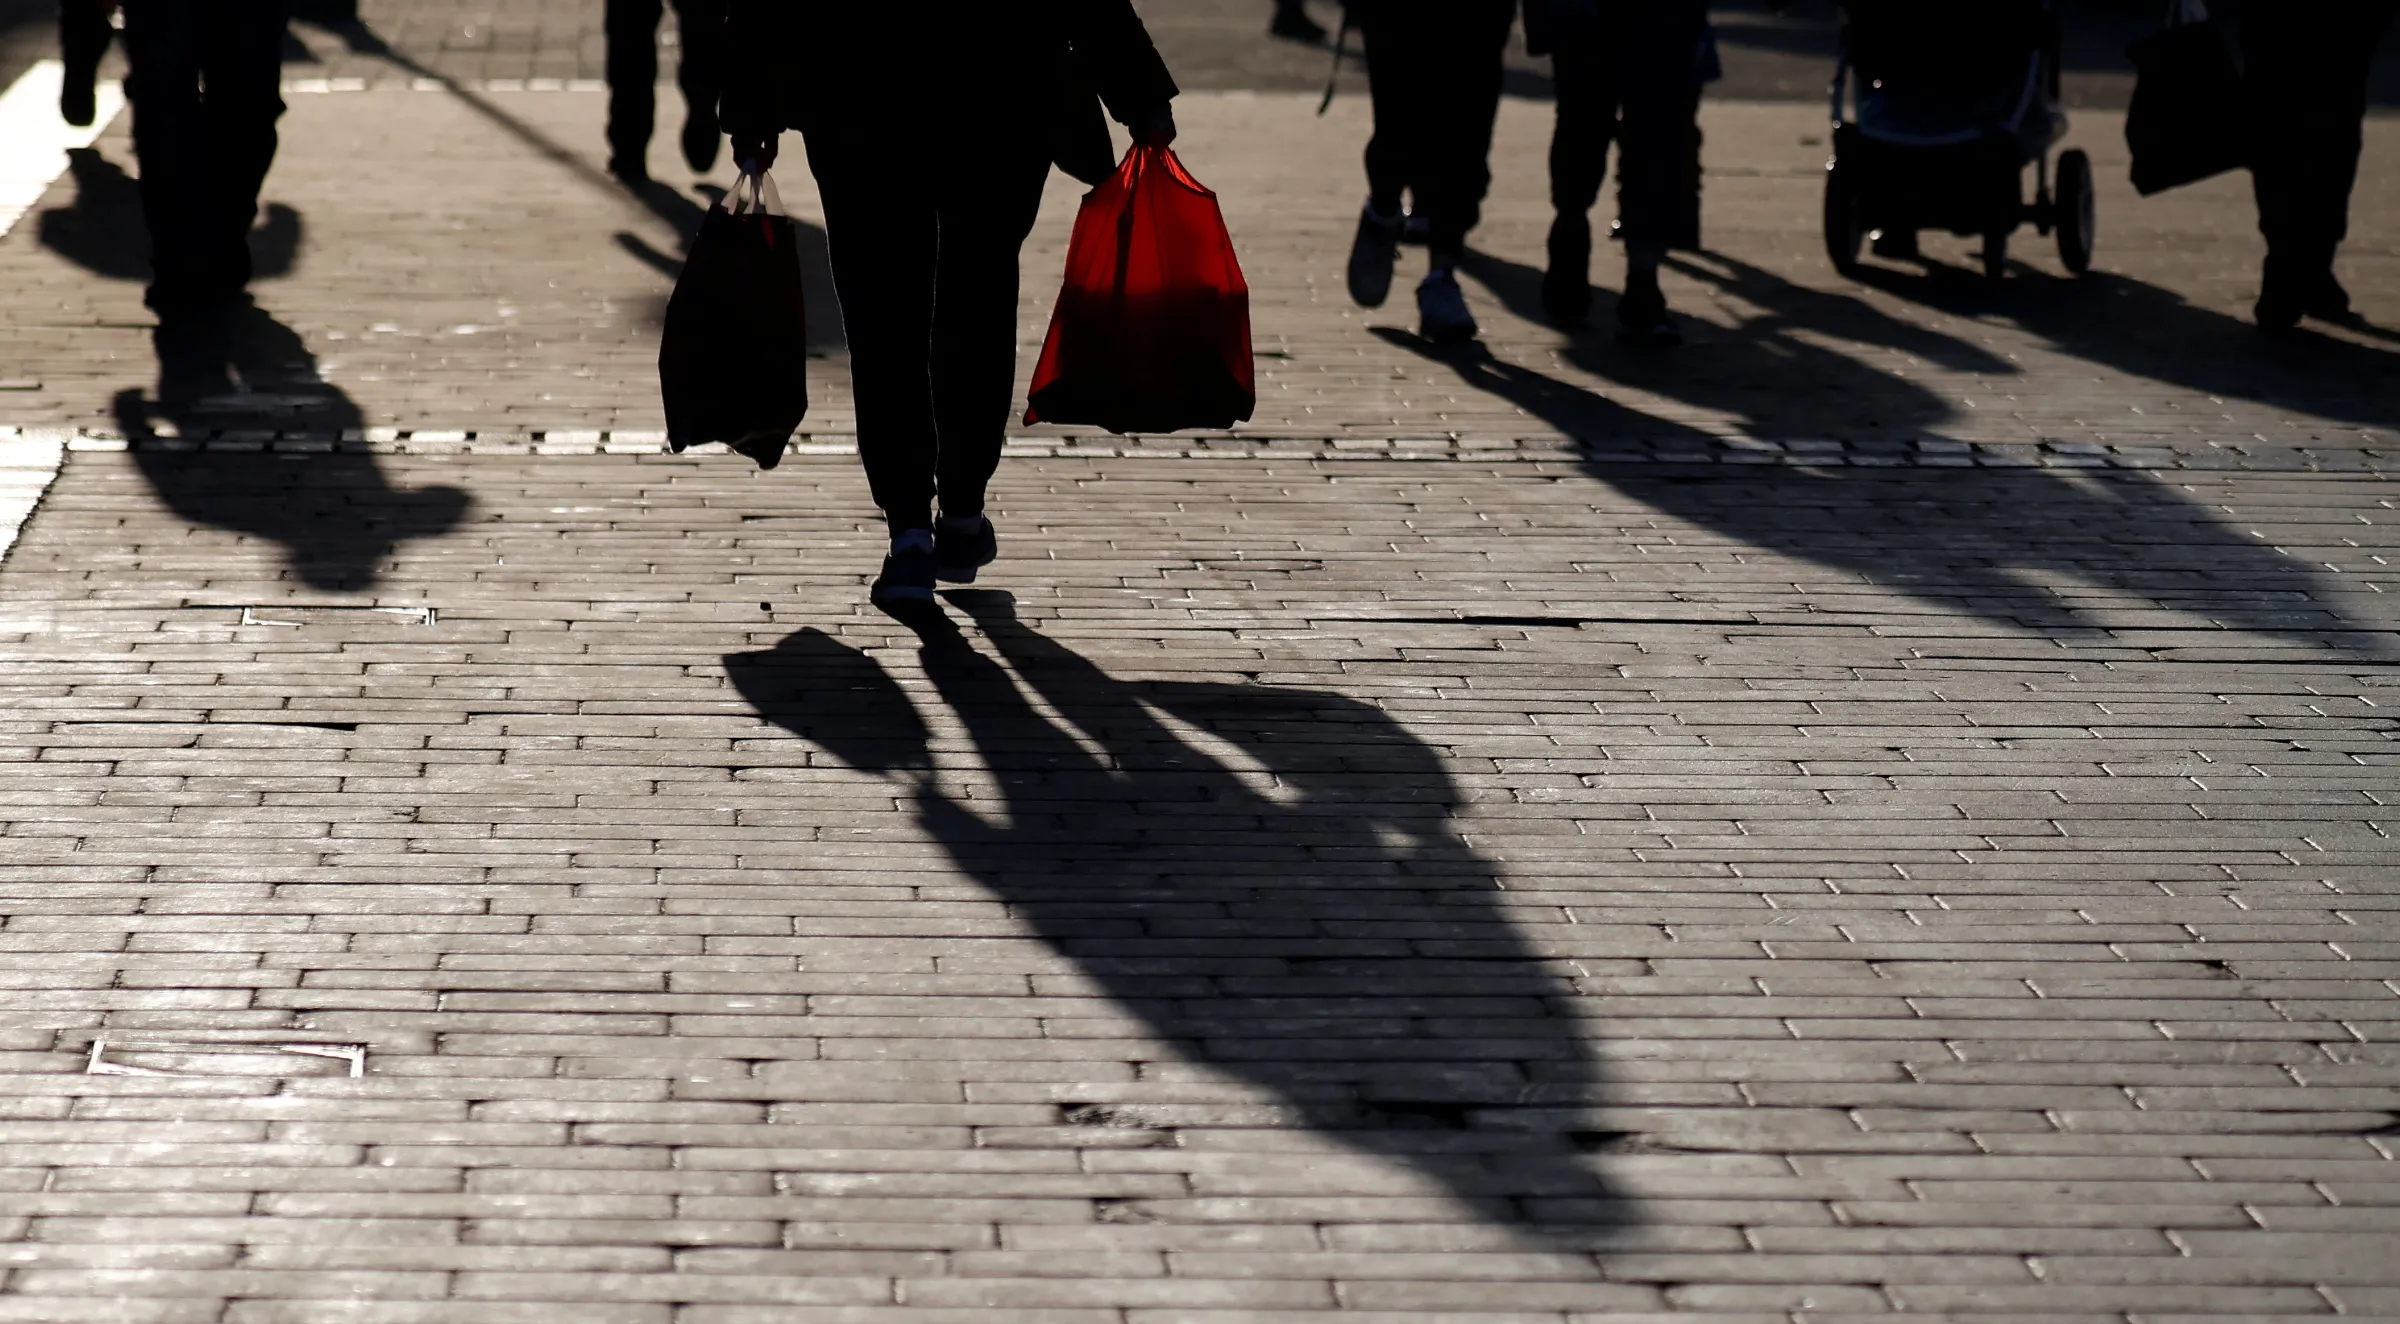 A woman carries shopping bags as she walks along a pedestrianised street, amid the coronavirus disease (COVID-19) pandemic, in Bolton, Britain, December 18, 2021. REUTERS/Phil Noble